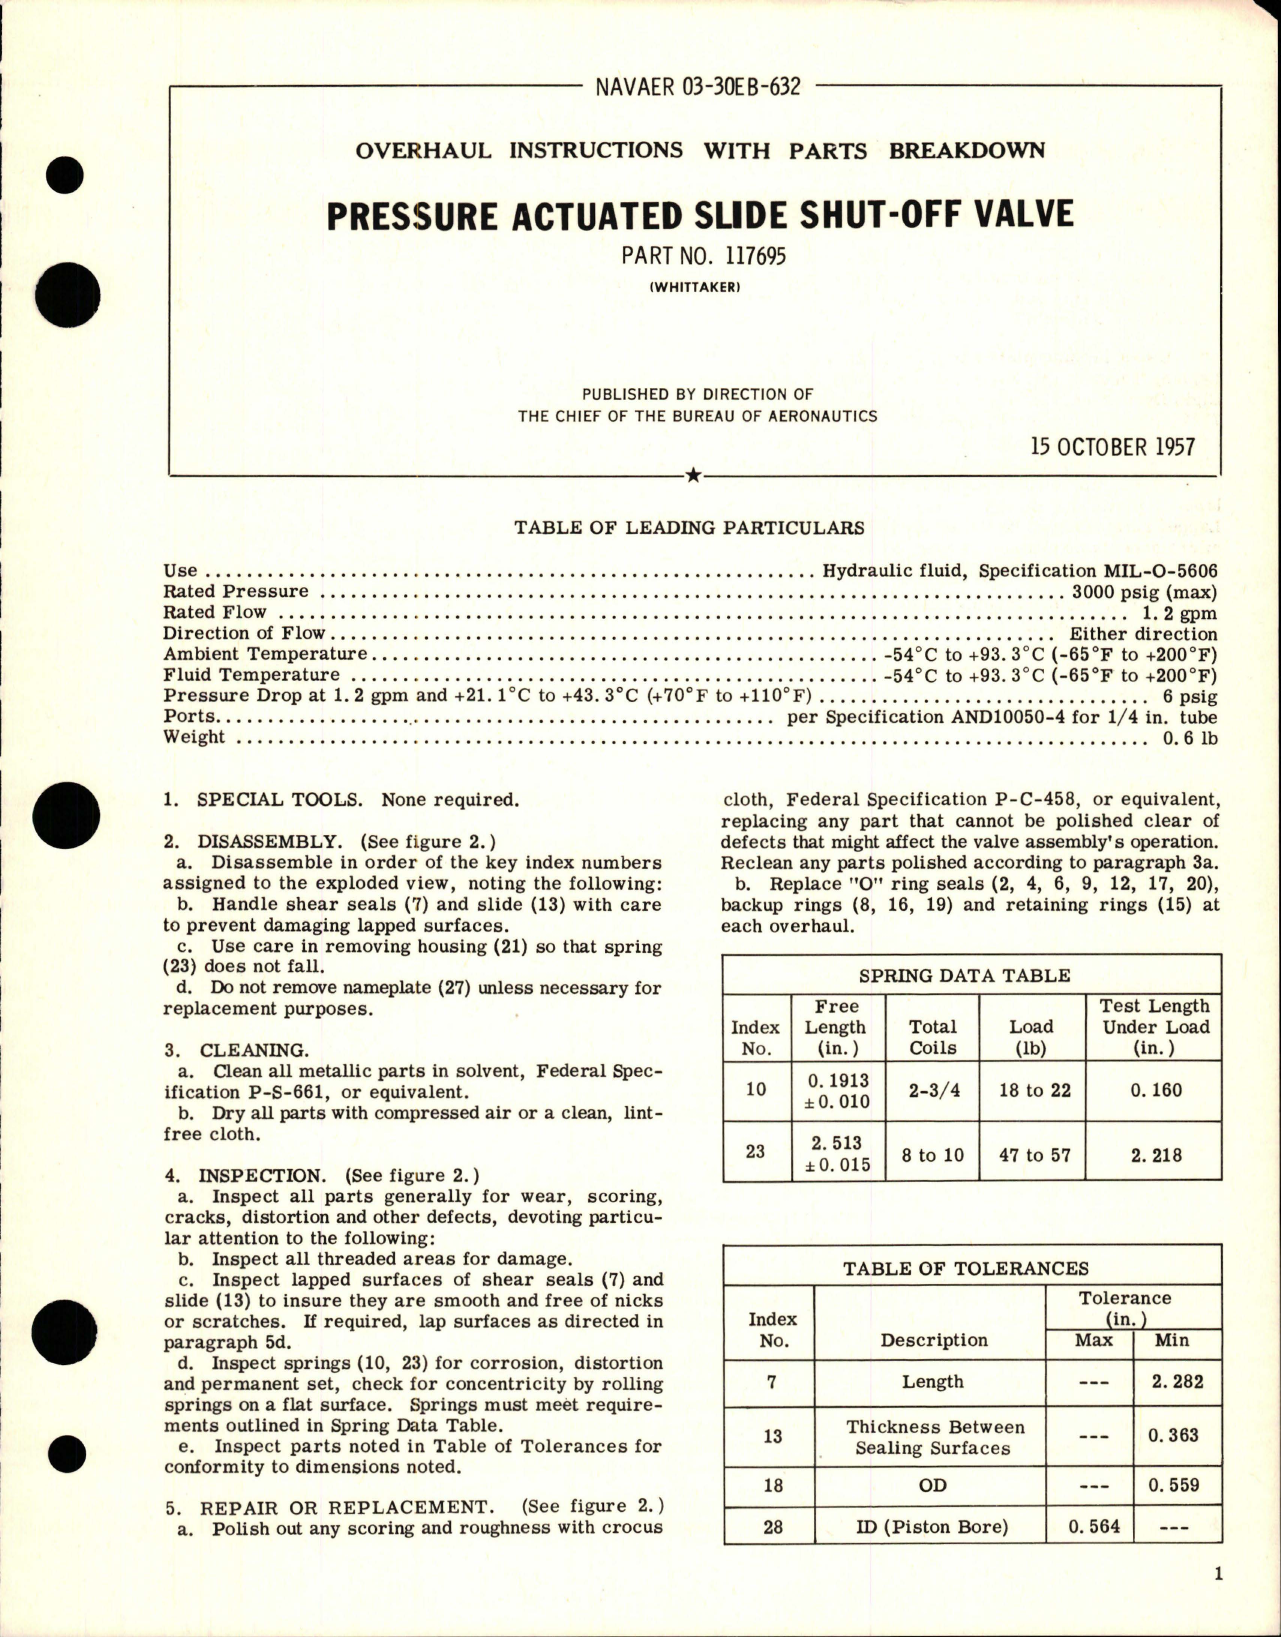 Sample page 1 from AirCorps Library document: Overhaul Instructions with Parts Breakdown for Pressure Actuated Slide Shut-Off Valve - Part 117695